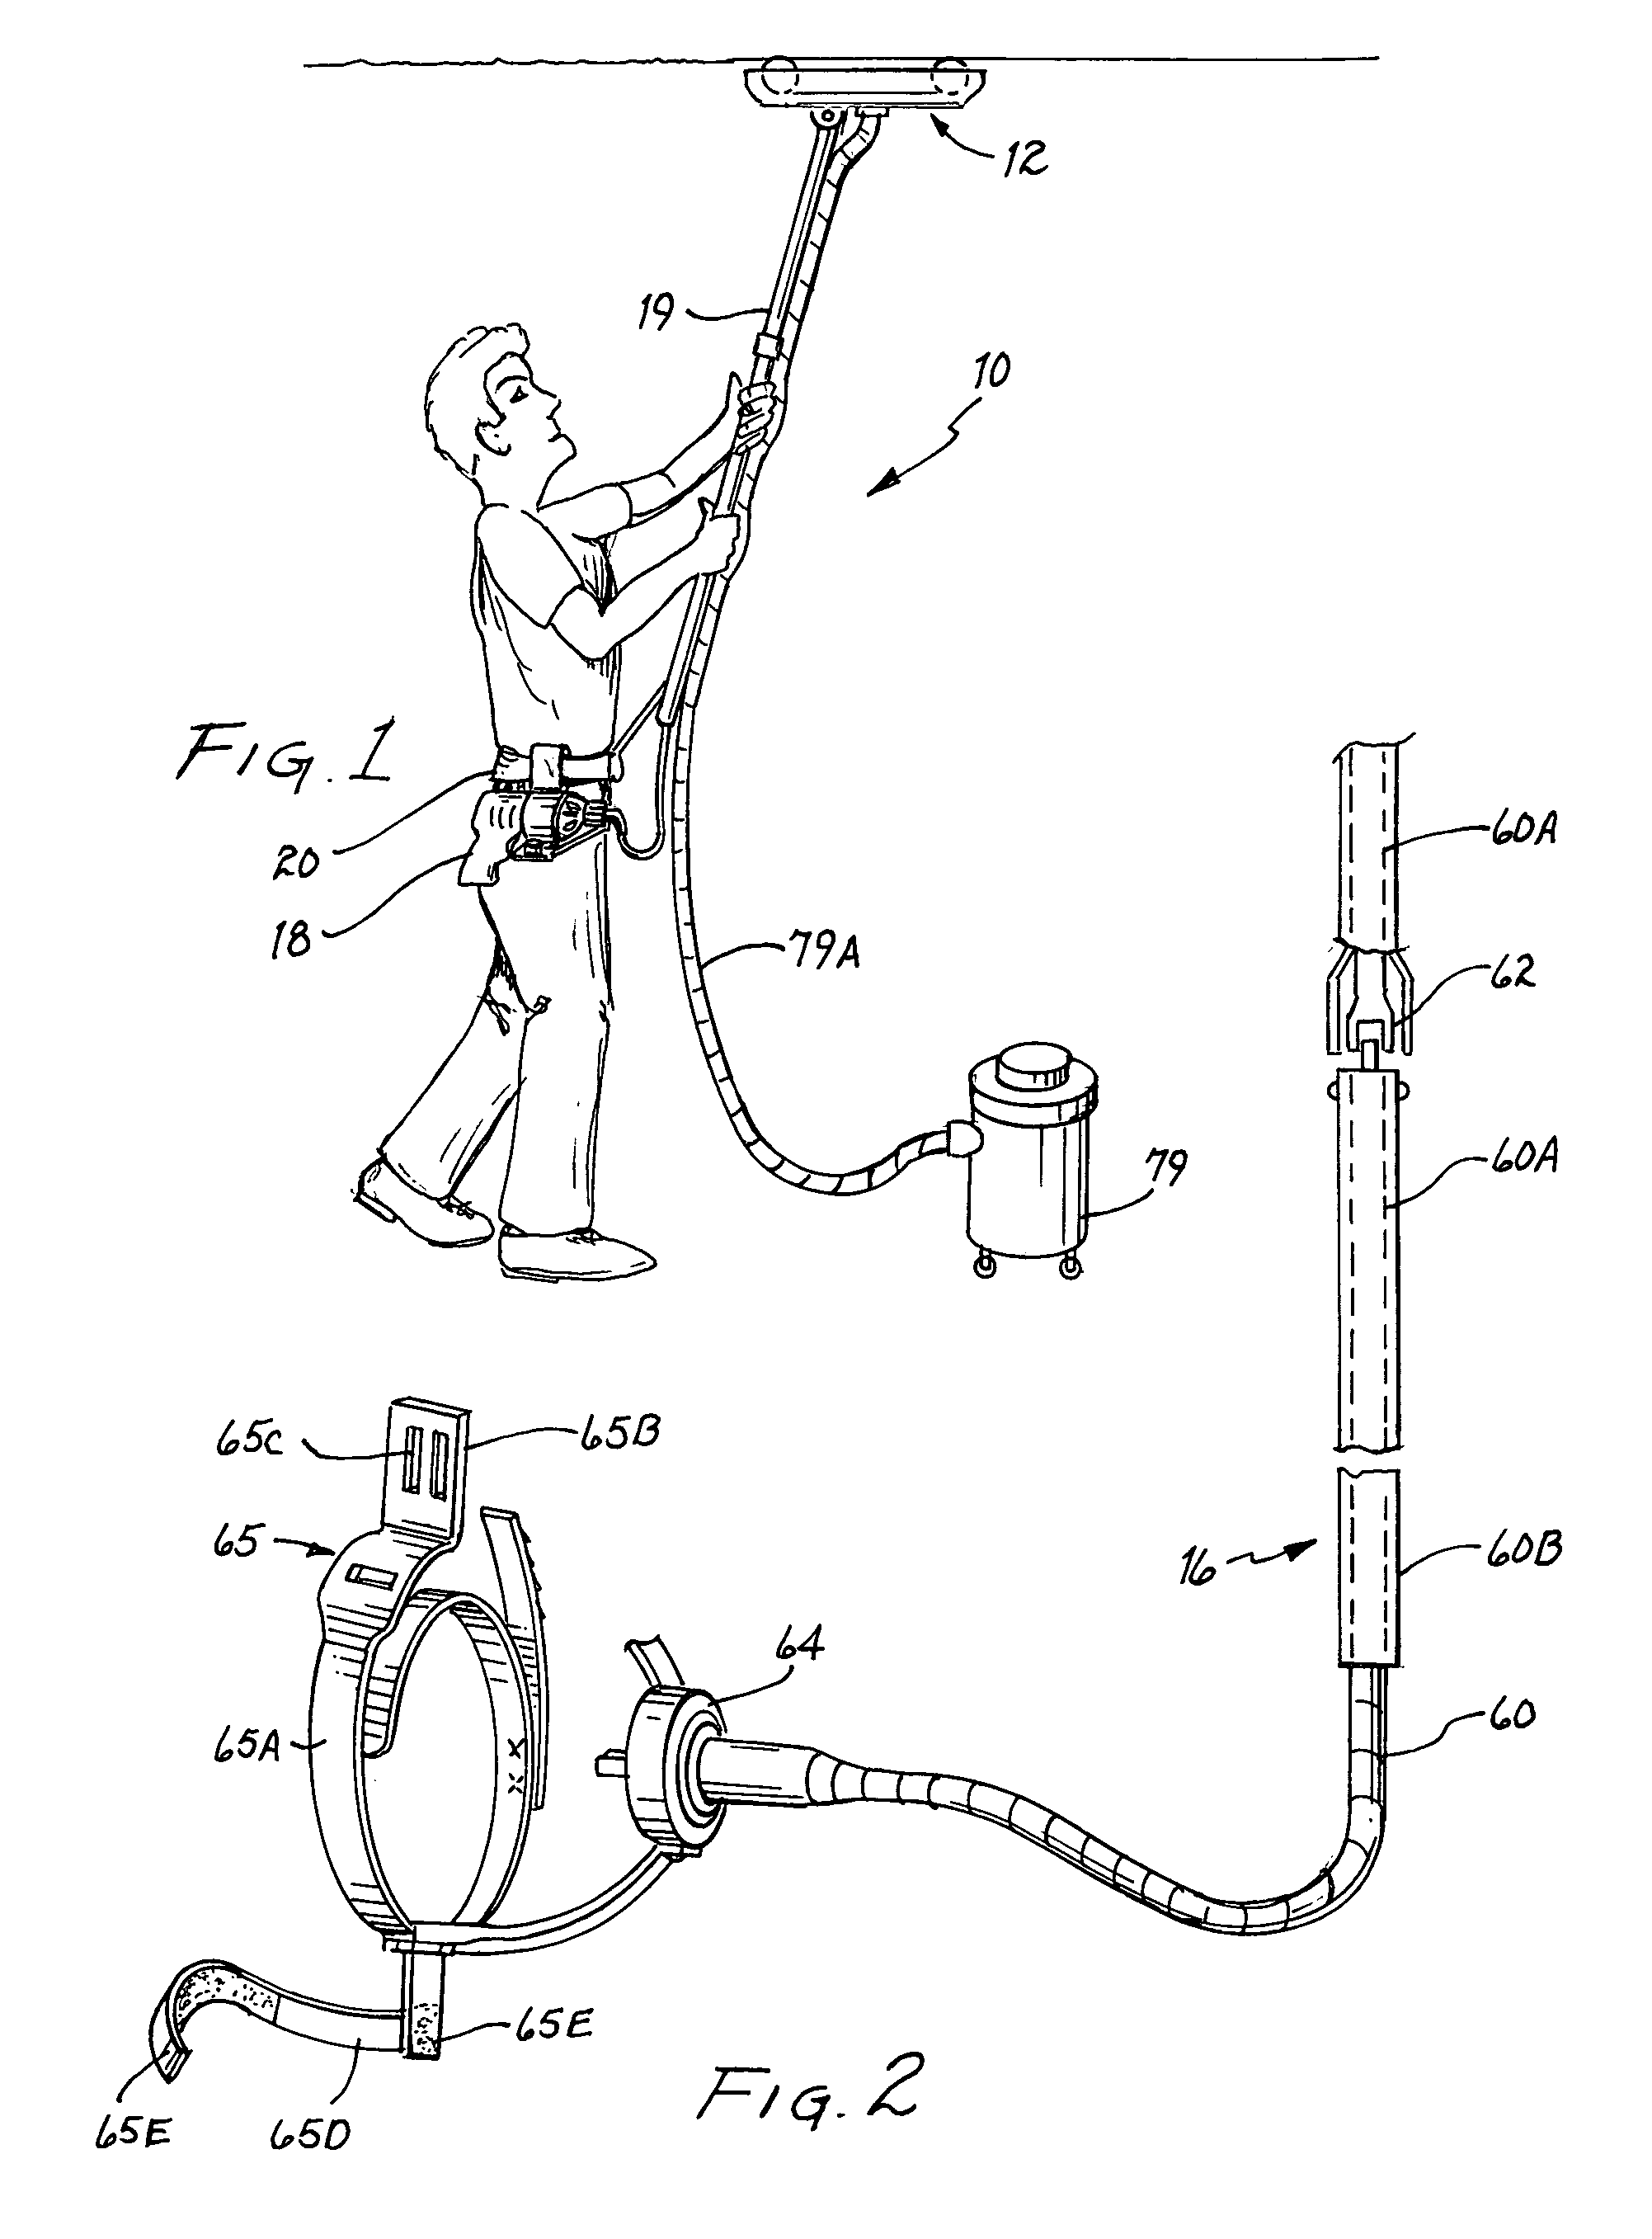 Extendable remote motored sander and method therefor